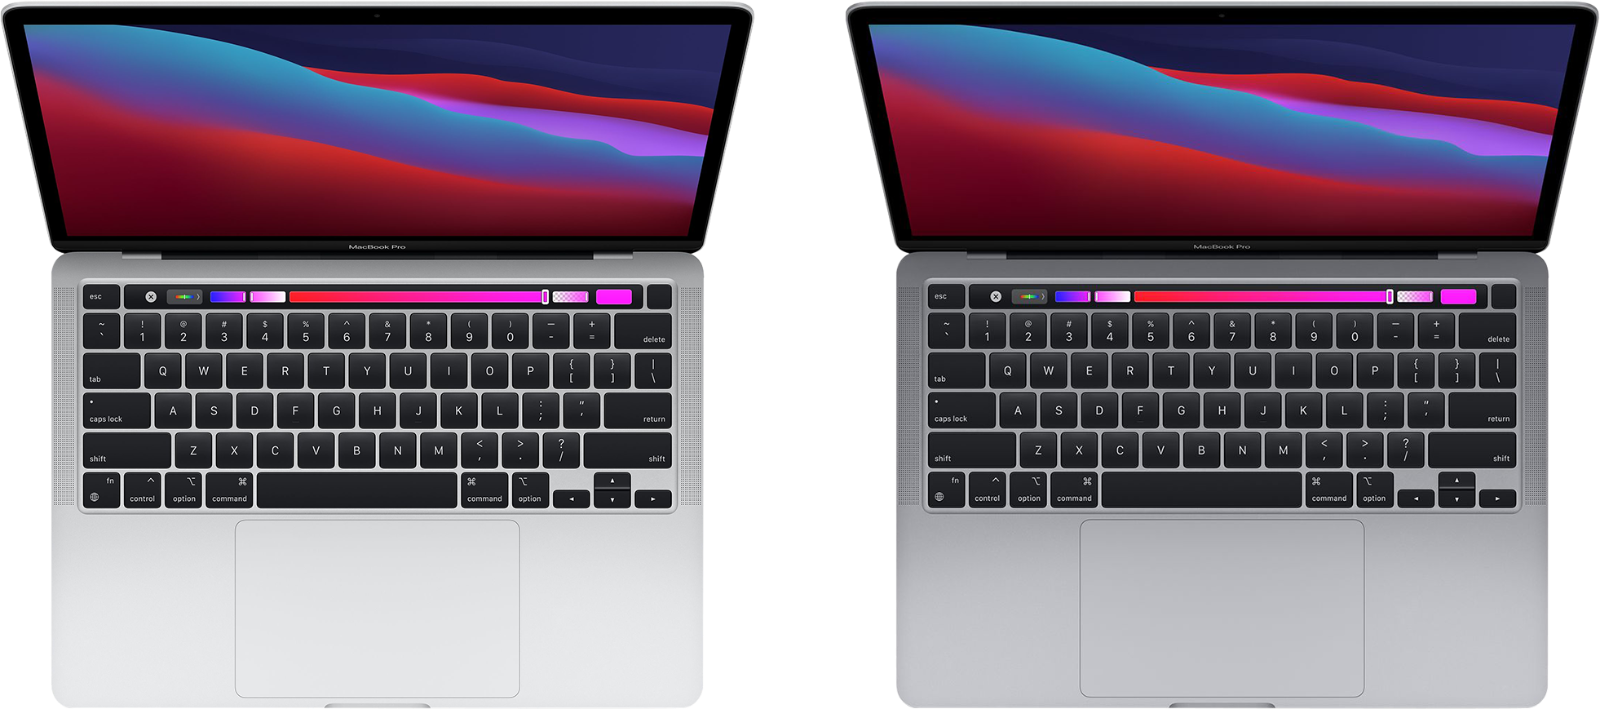 MacBook Pro (13-inch, M1, 2020) - Technical Specifications